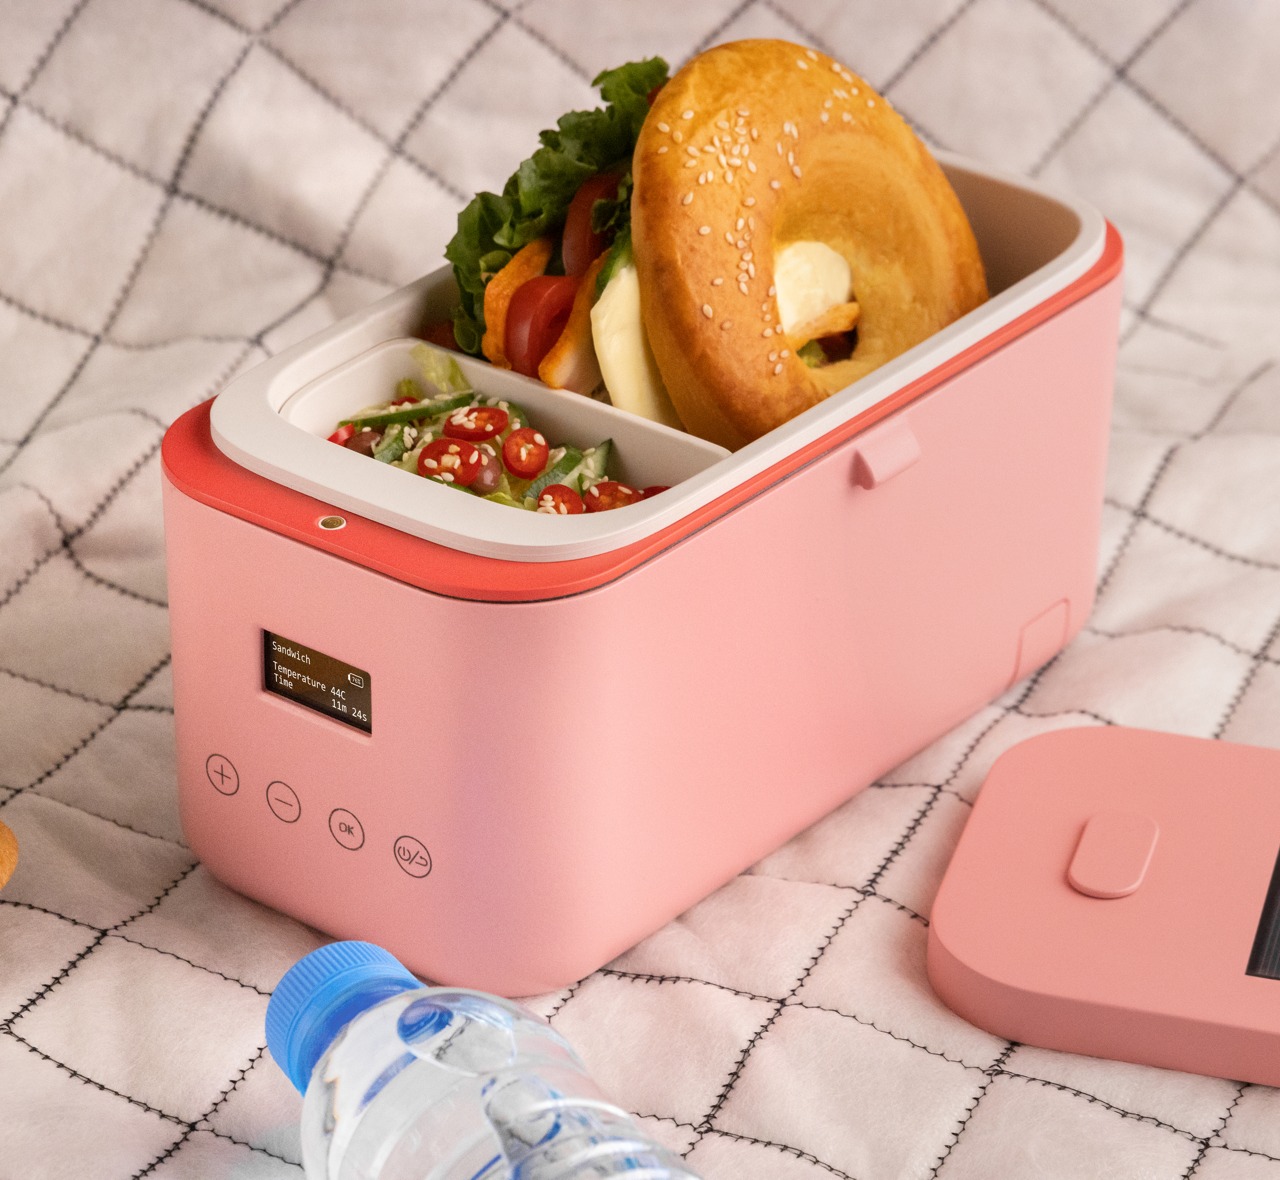 This Self-Heating Lunchbox Is Much Better Than a Microwave